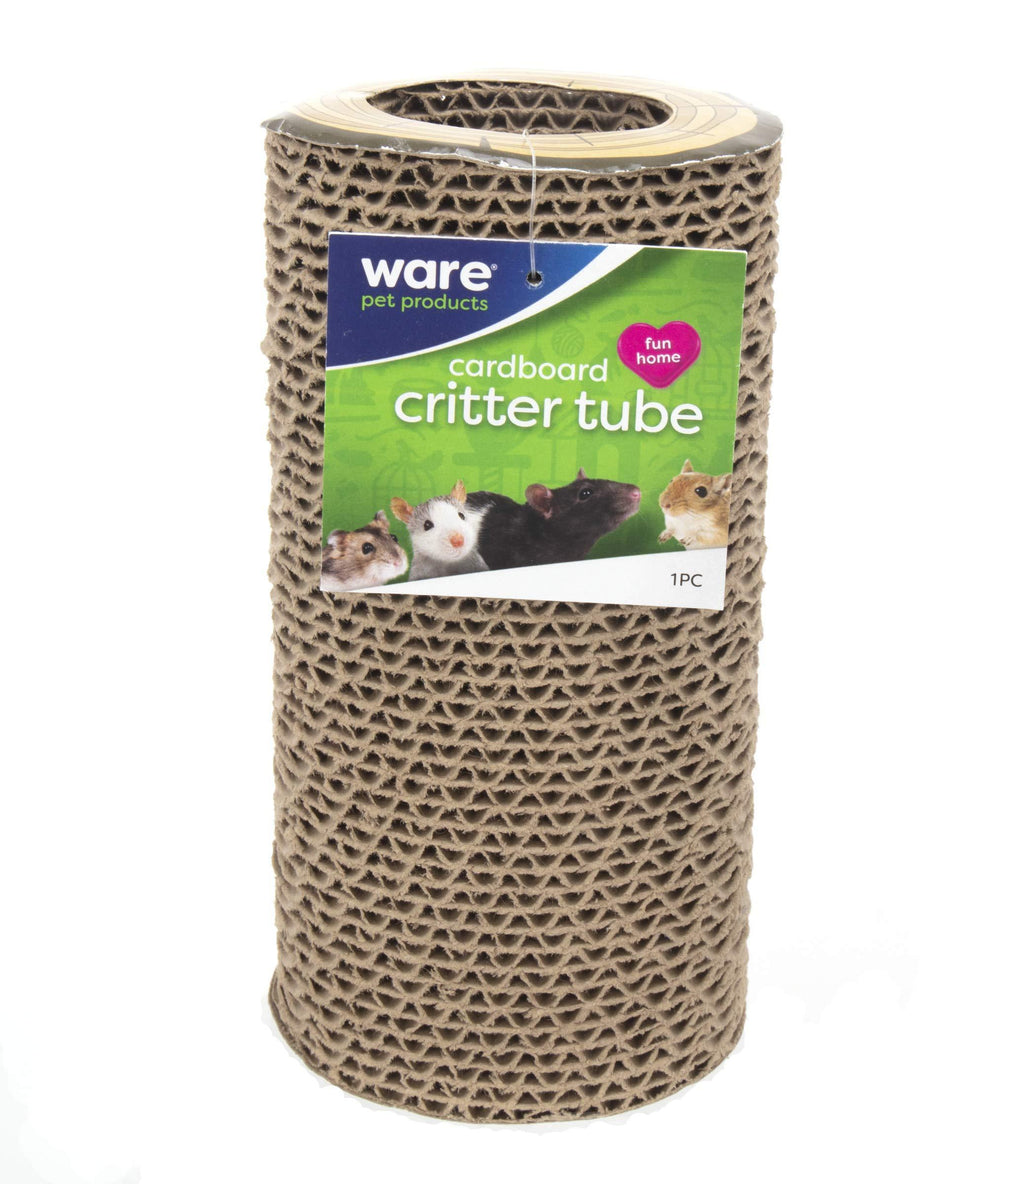 [Australia] - Ware Pet Products Cardboard Critter Tube, 7.5 Inch, for Small Pets 